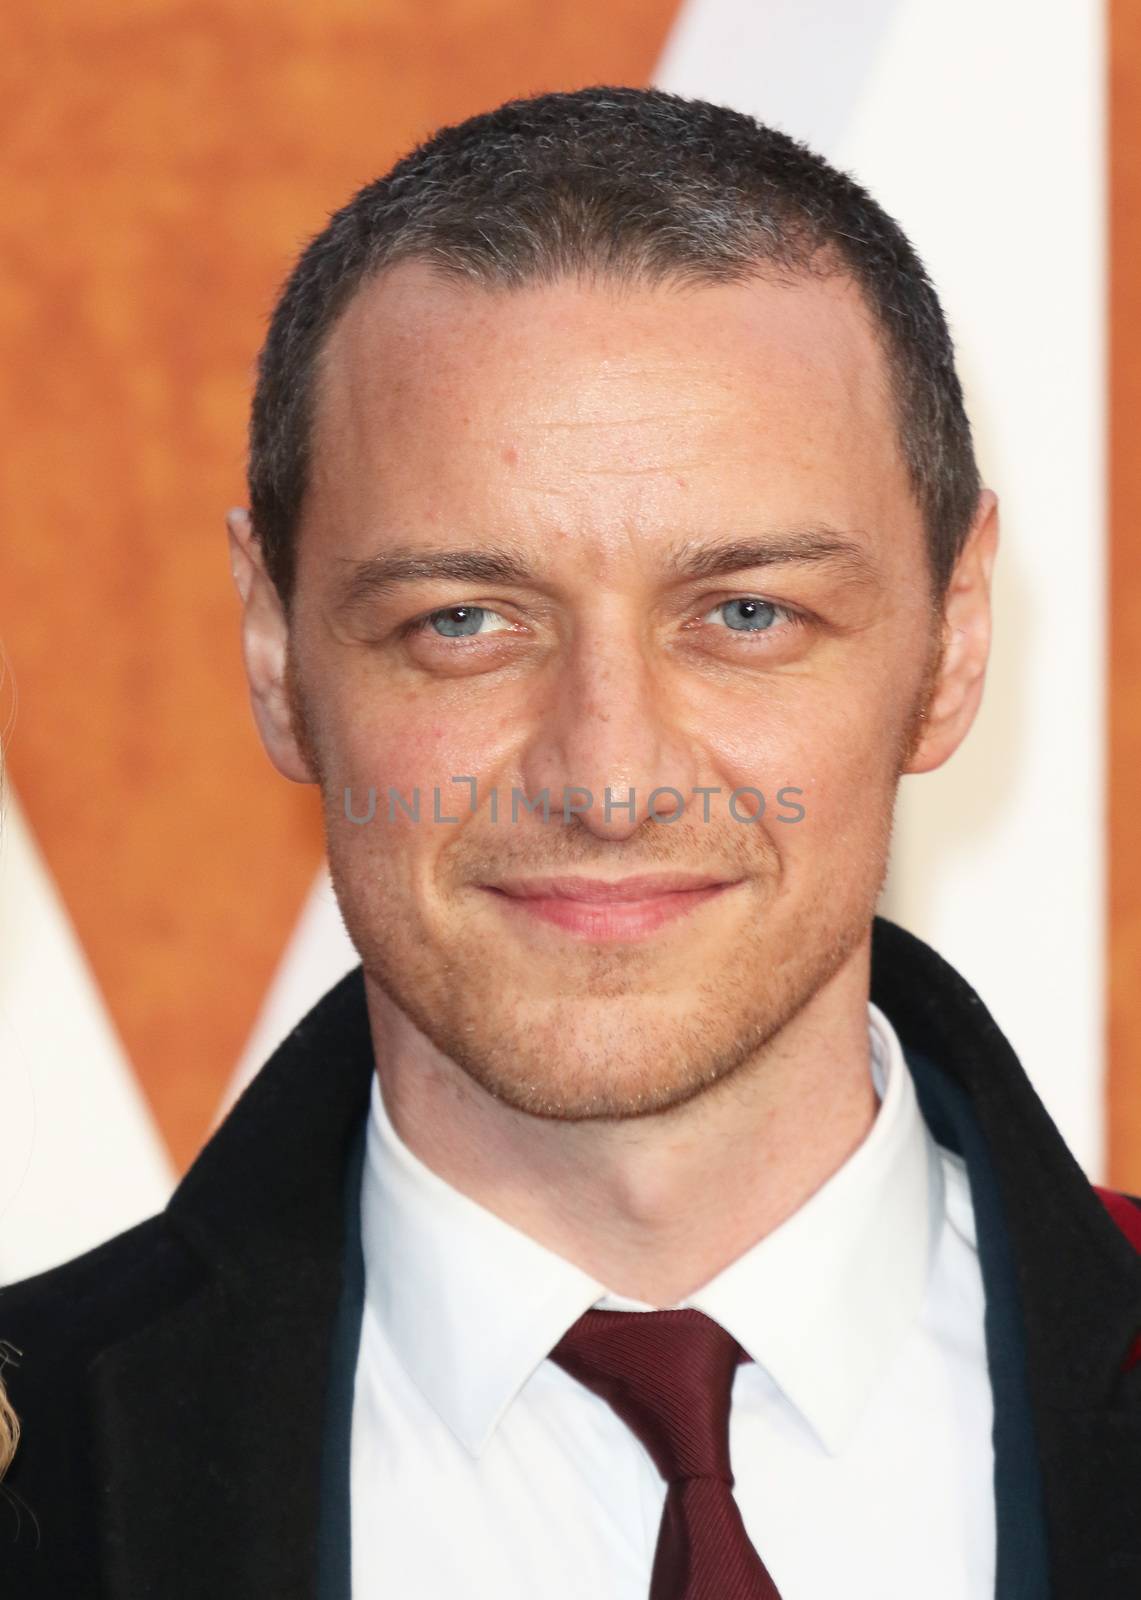 ENGLAND, London: James McAvoy attends the European premiere of The Martian in Leicester Square in London, UK on September 24, 2015